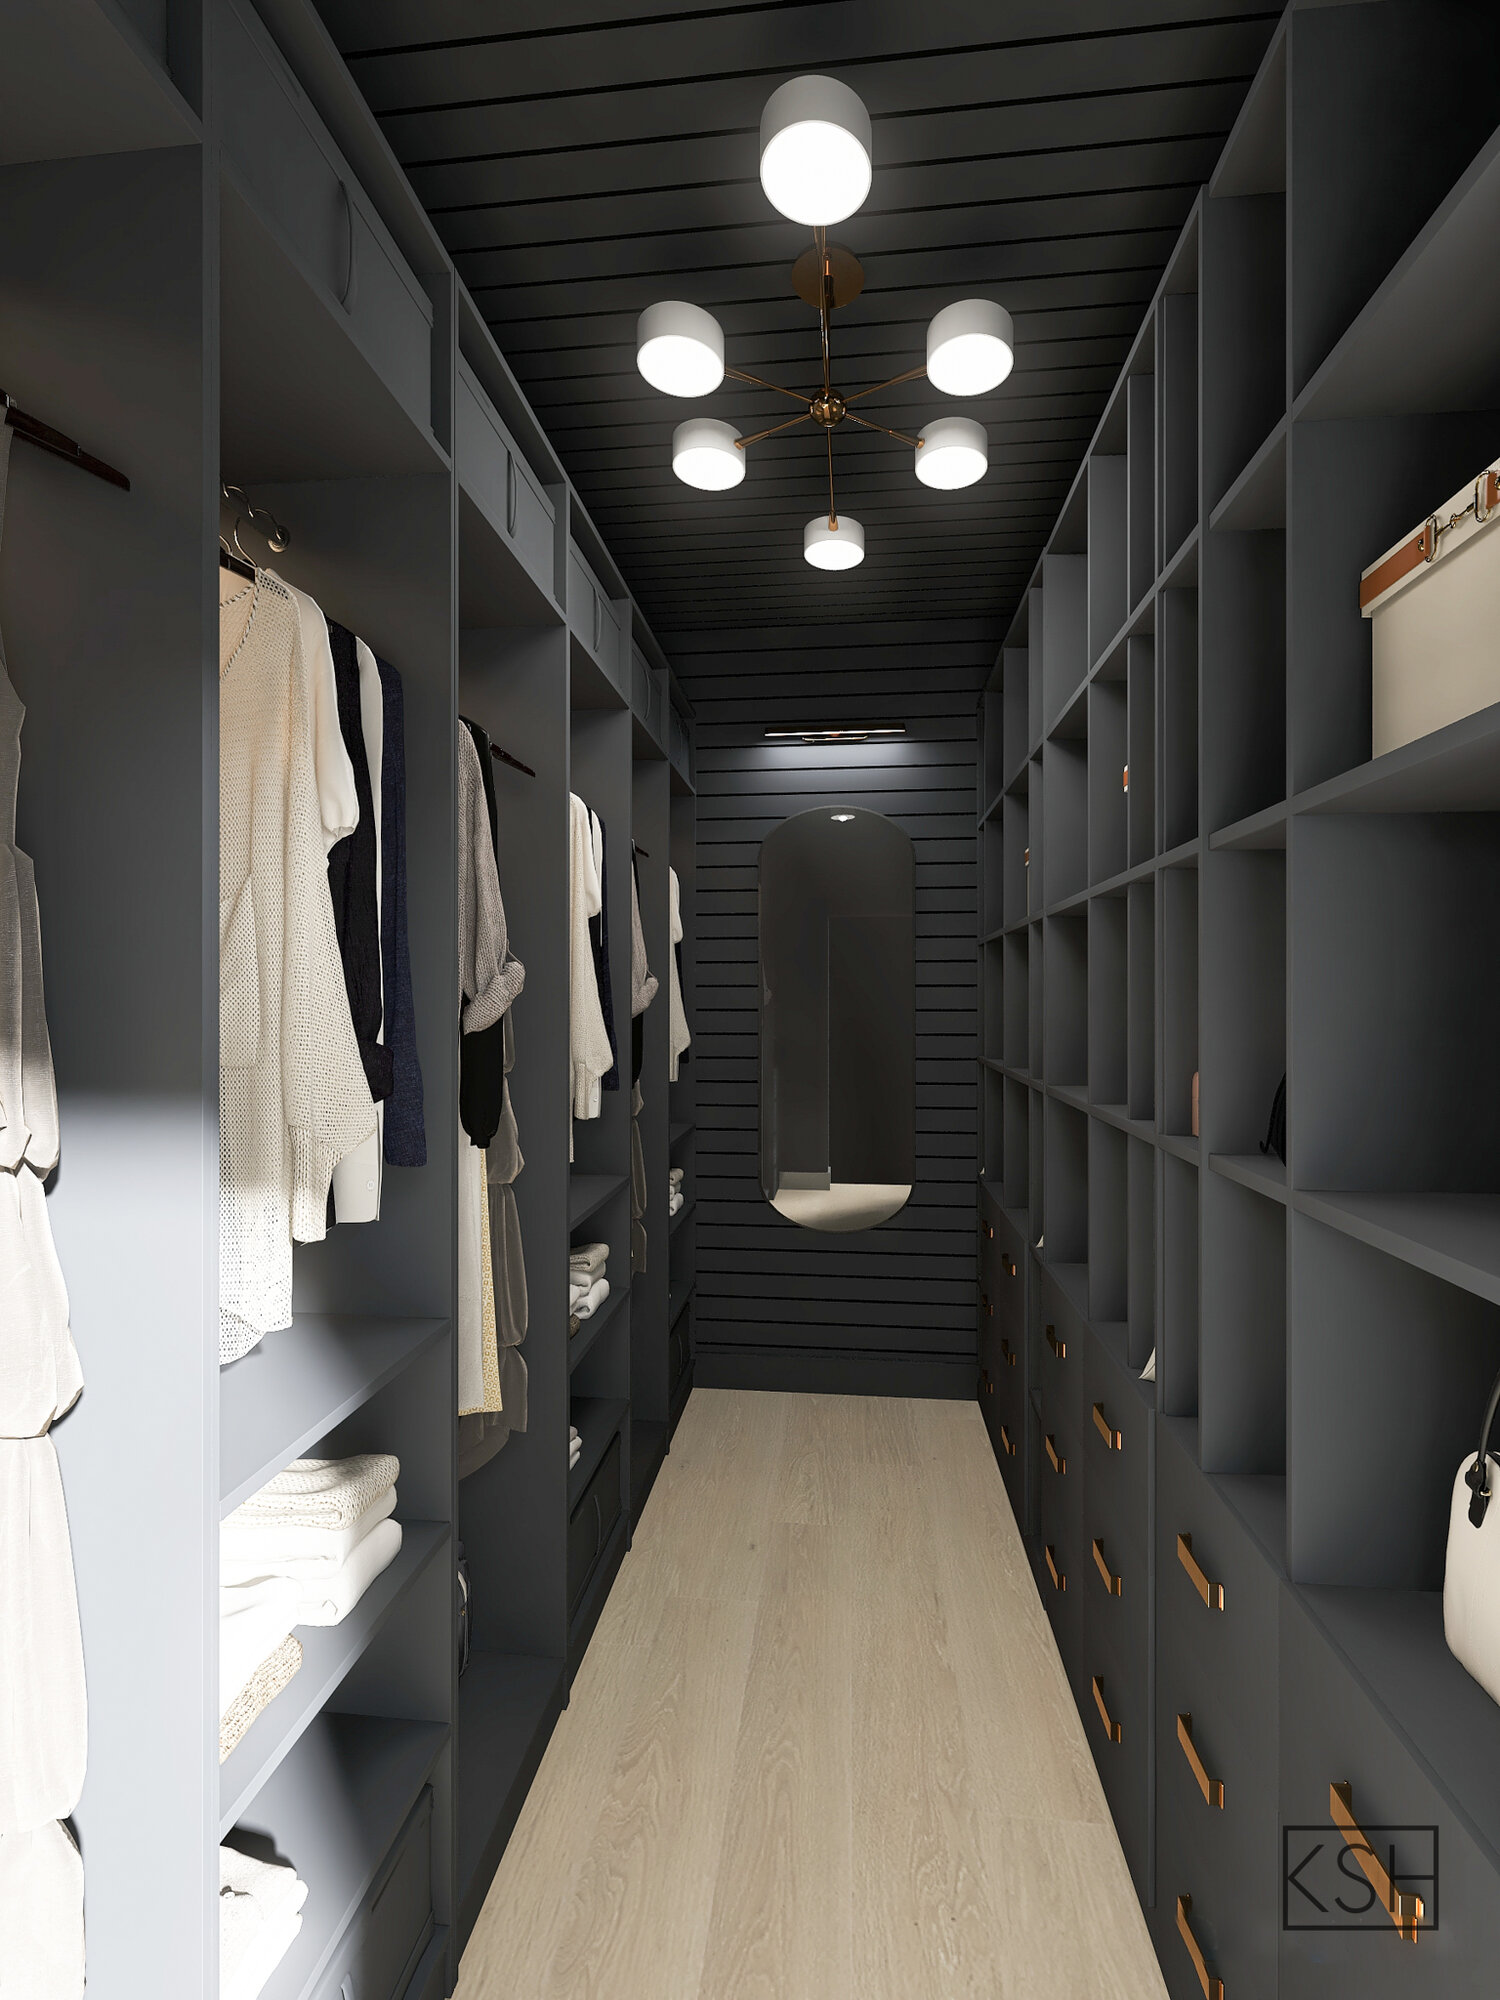 DIYing Walk-In Closet of Dreams with IKEA Pax System Kayla Simone Home